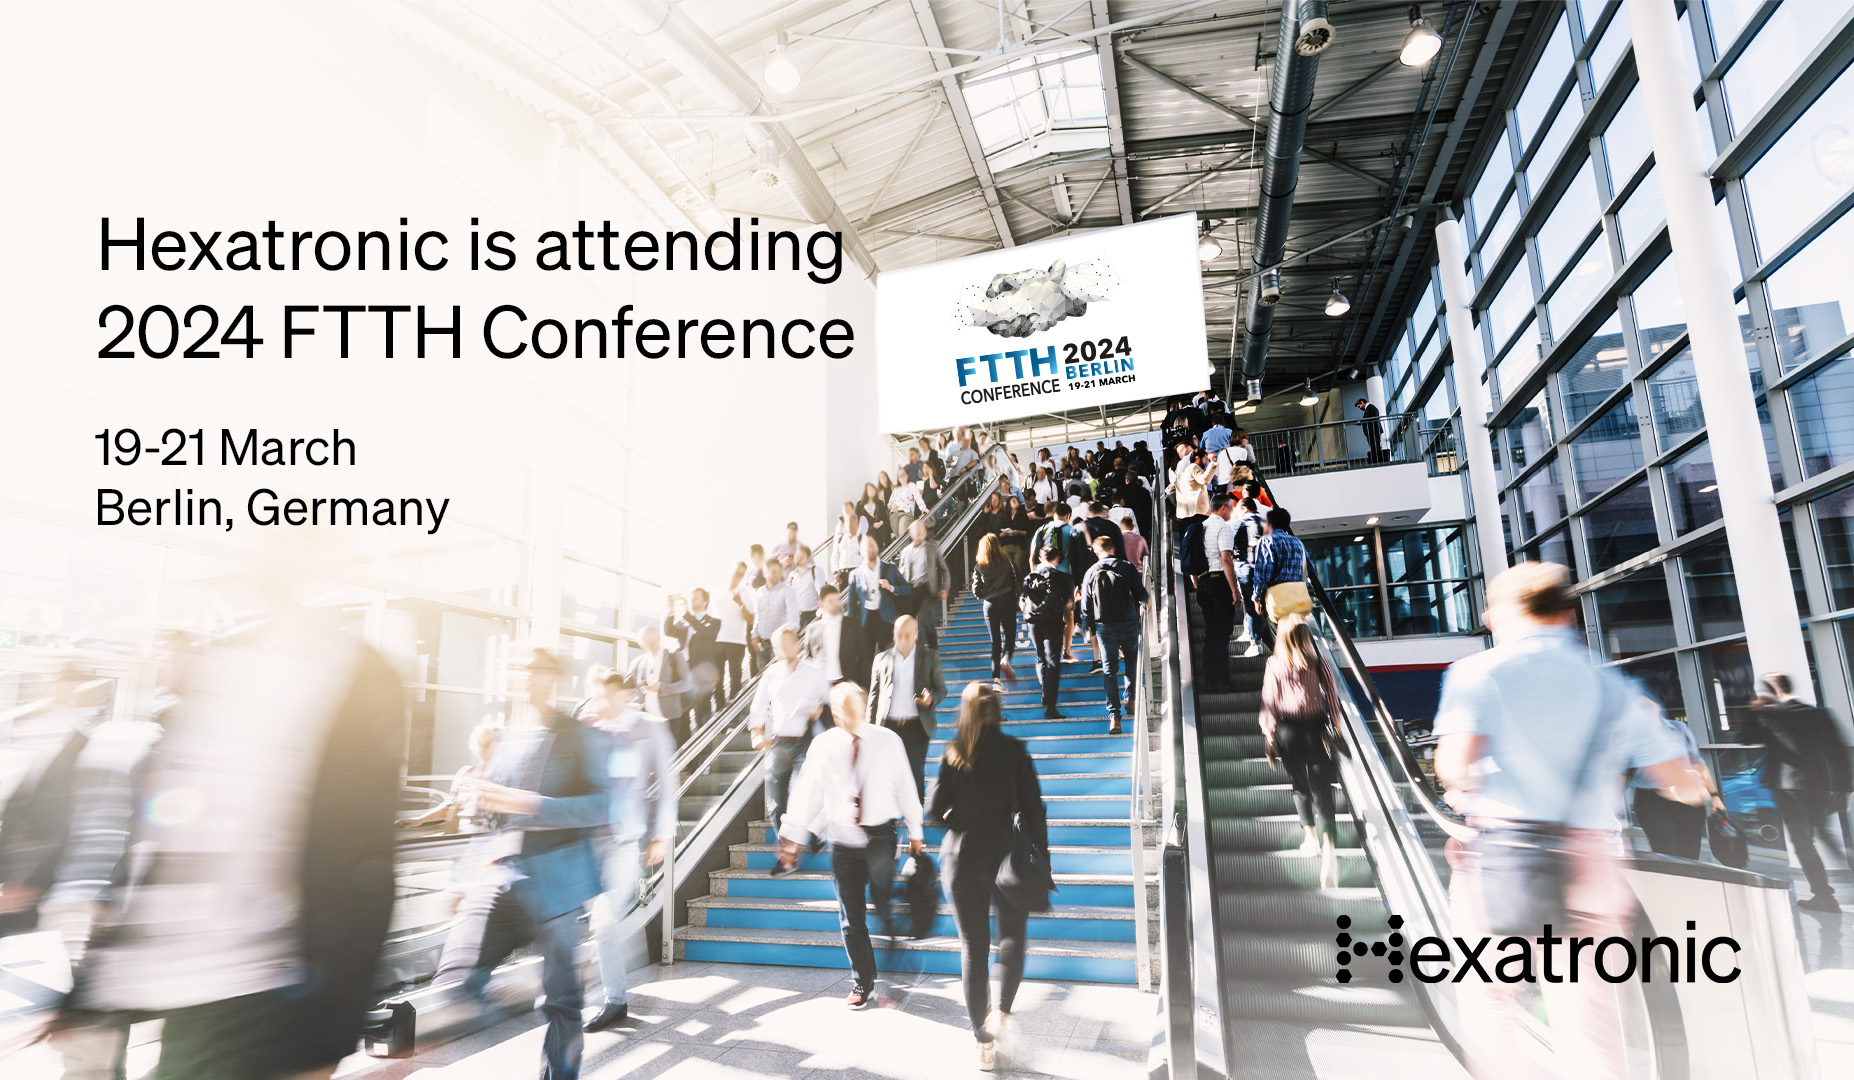 Join us at the FTTH Conference in Berlin